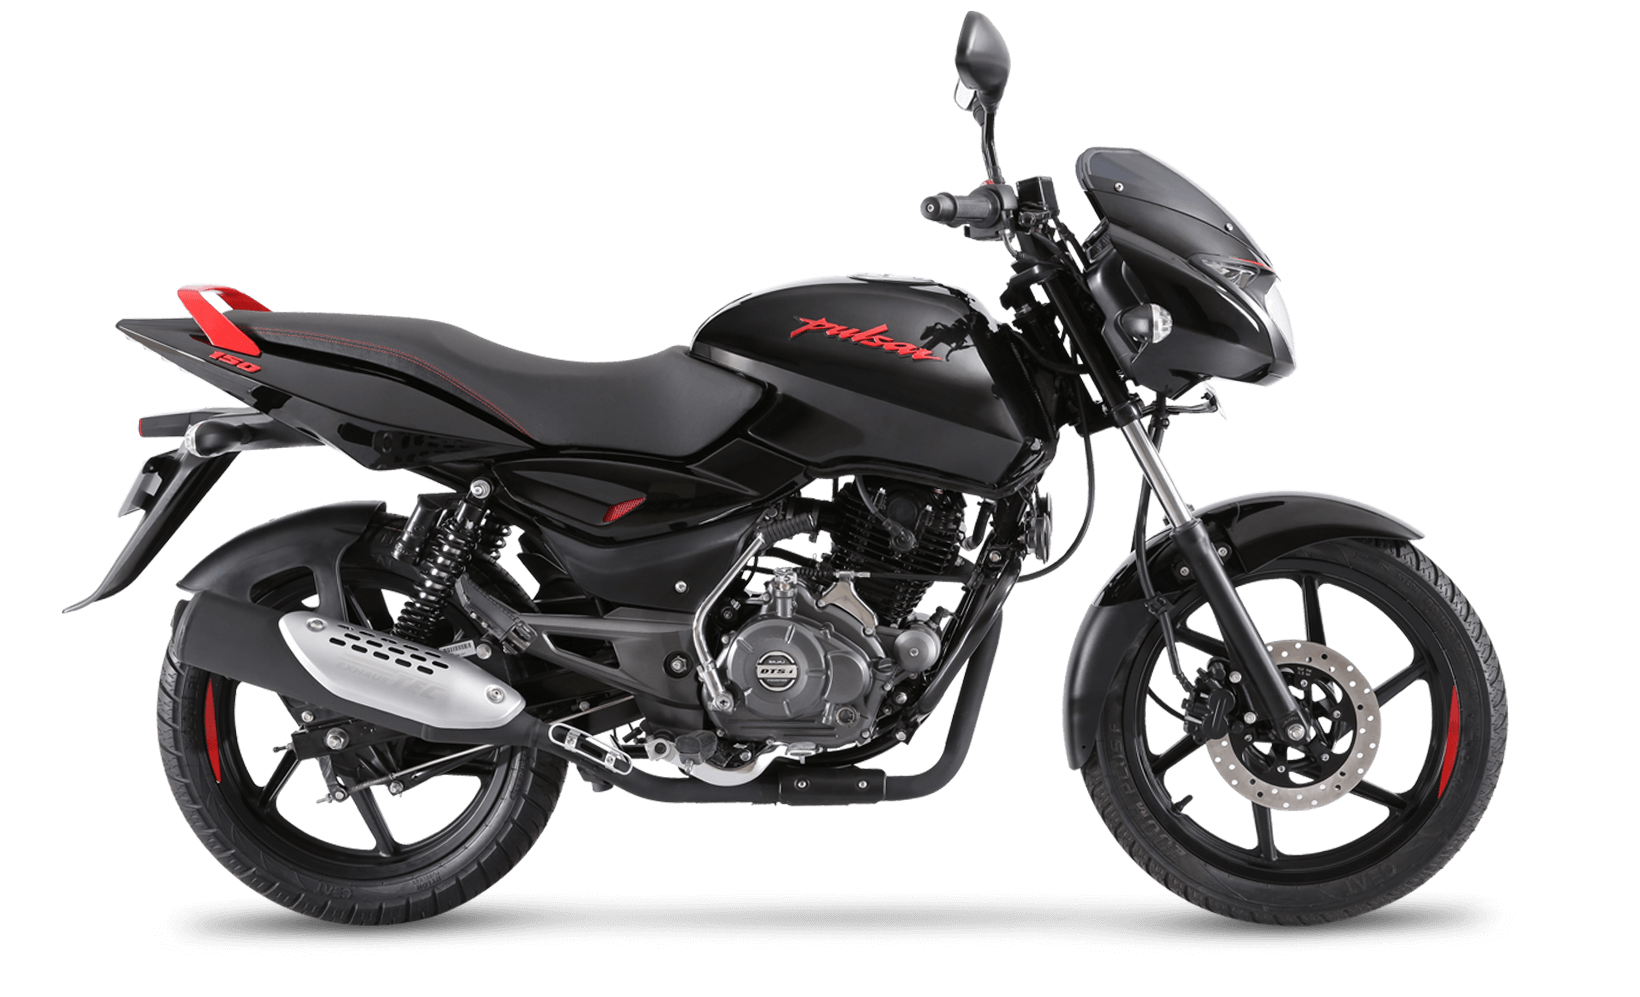 Bajaj Pulsar 125 Split Seat Variant Launched in India at Rs 79,091 - News18